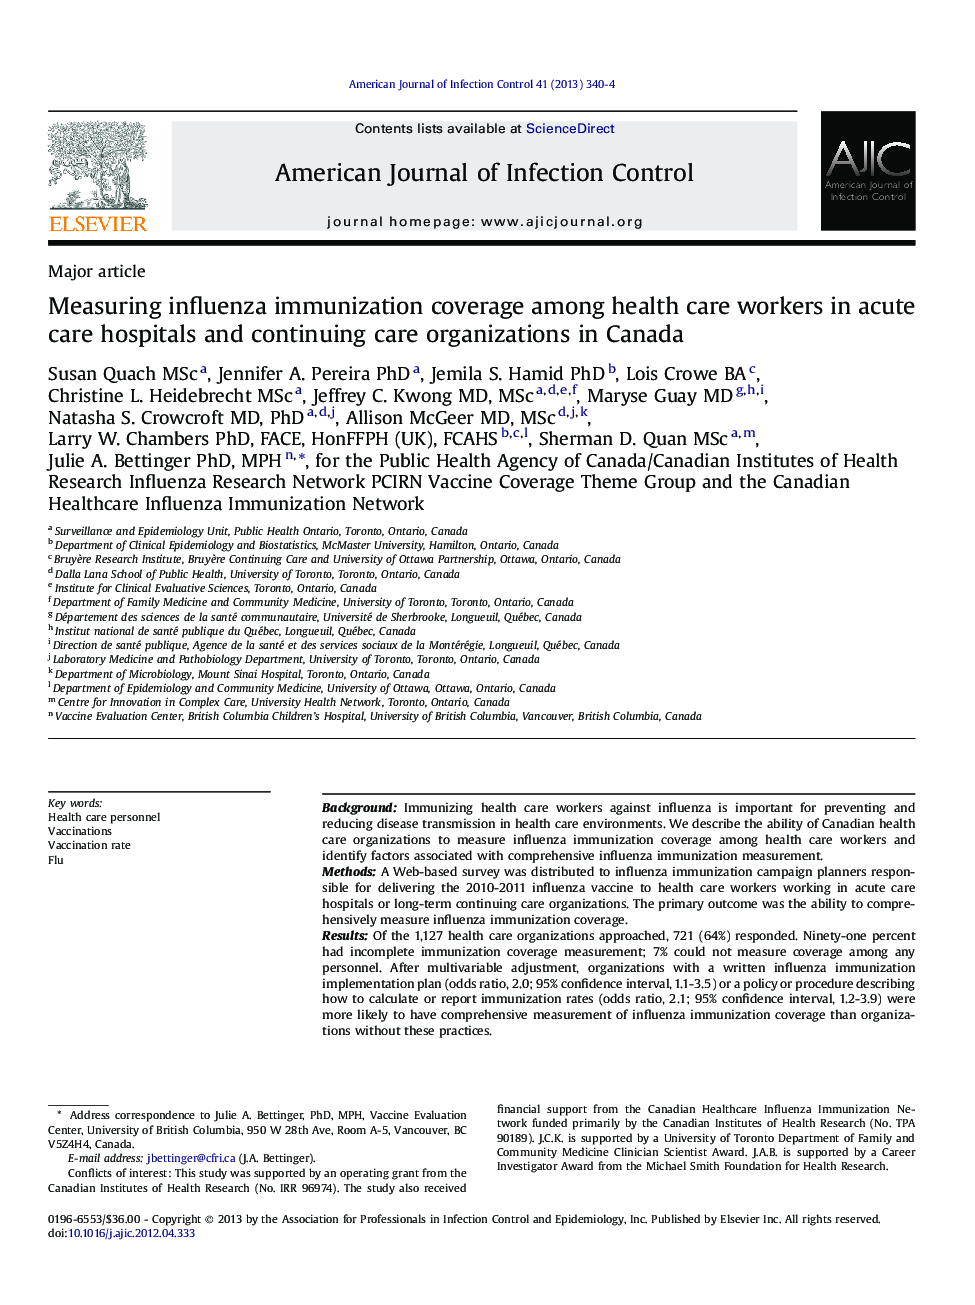 Measuring influenza immunization coverage among health care workers in acute care hospitals and continuing care organizations in Canada 